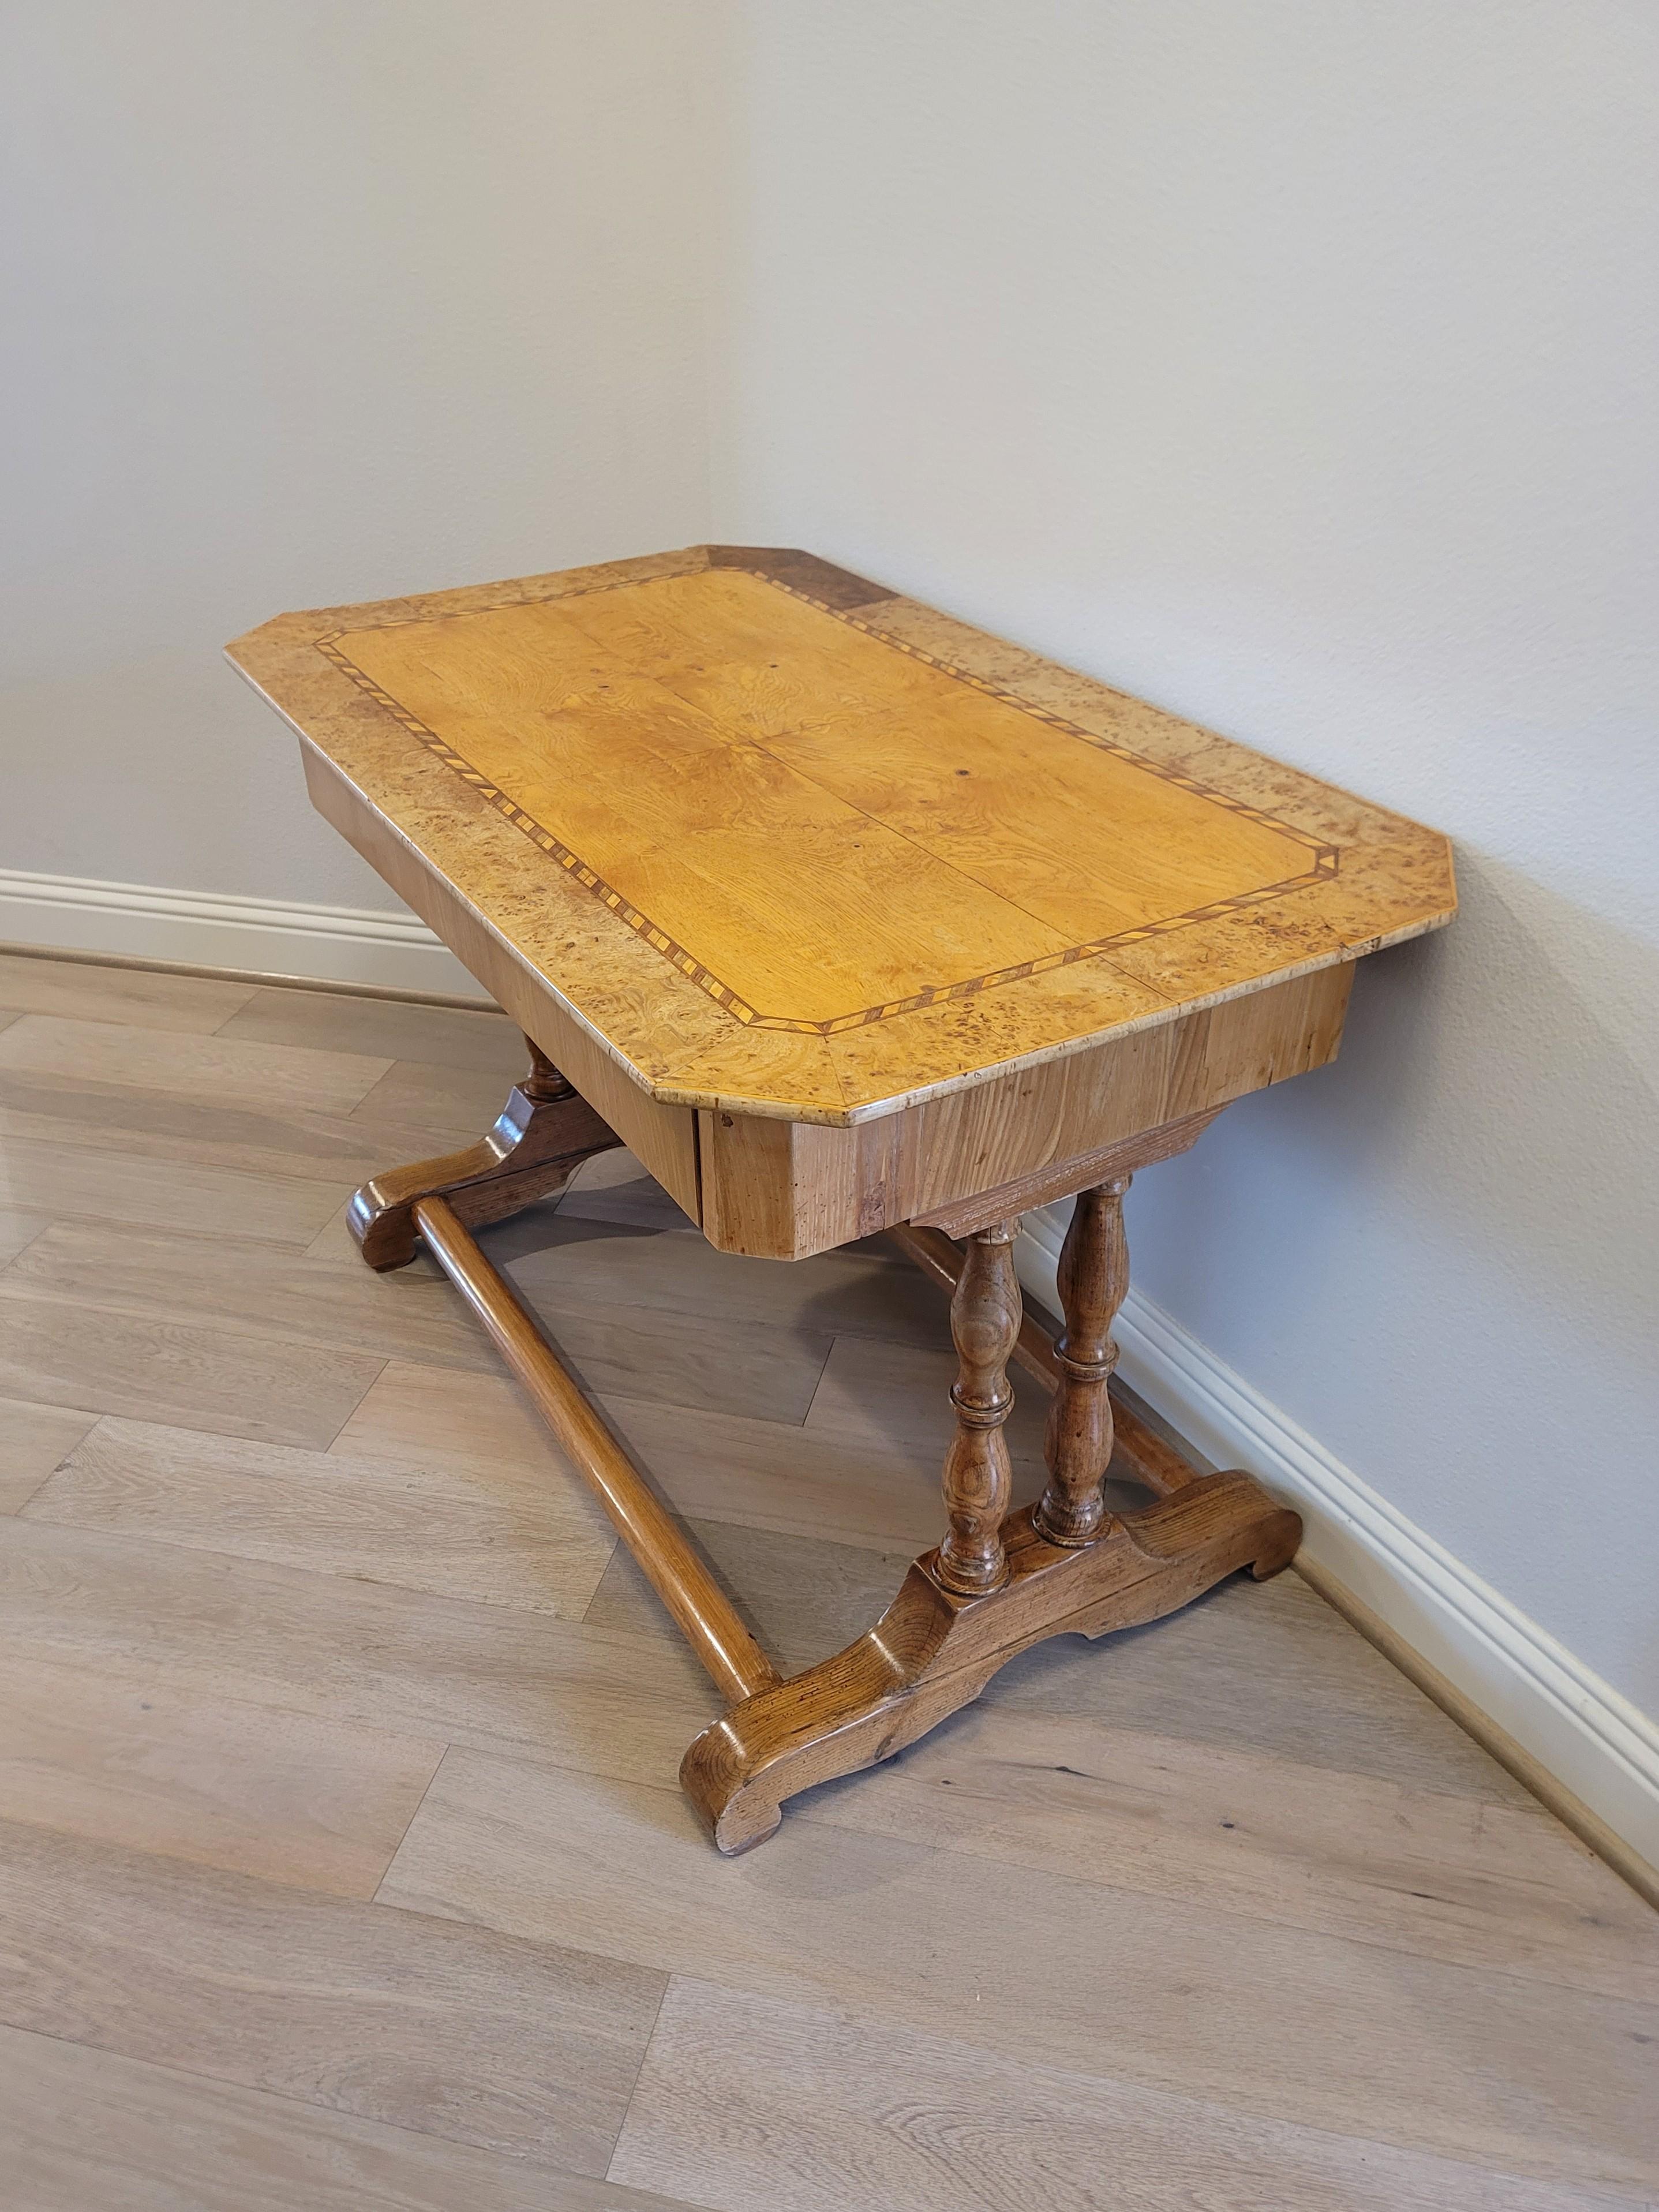 19th Century Continental Biedermeier Period Figured Maple Table  In Good Condition For Sale In Forney, TX